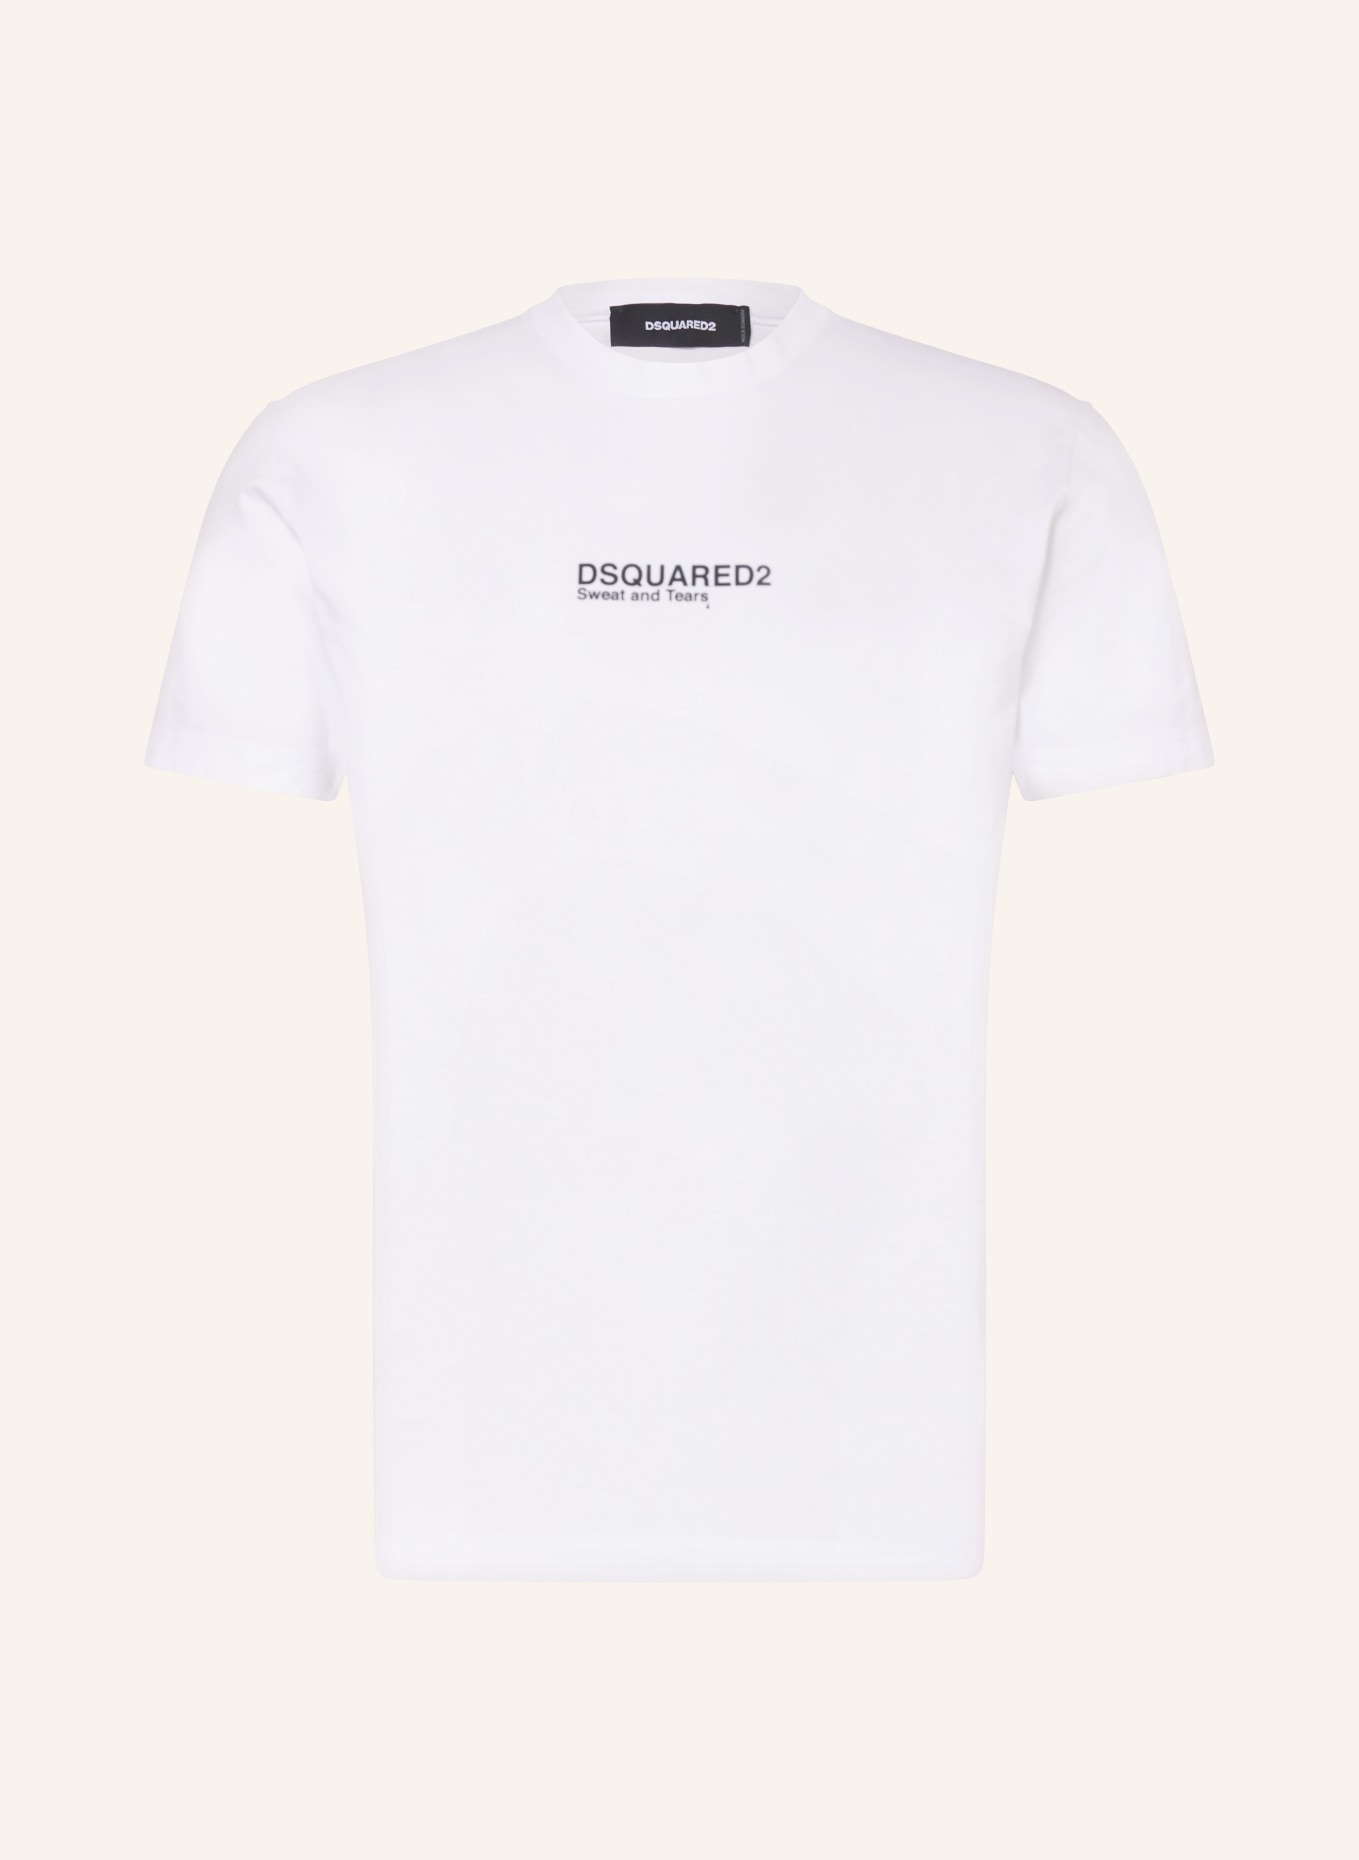 DSQUARED2 T-Shirt SWEAT AND TEARS, Farbe: WEISS (Bild 1)